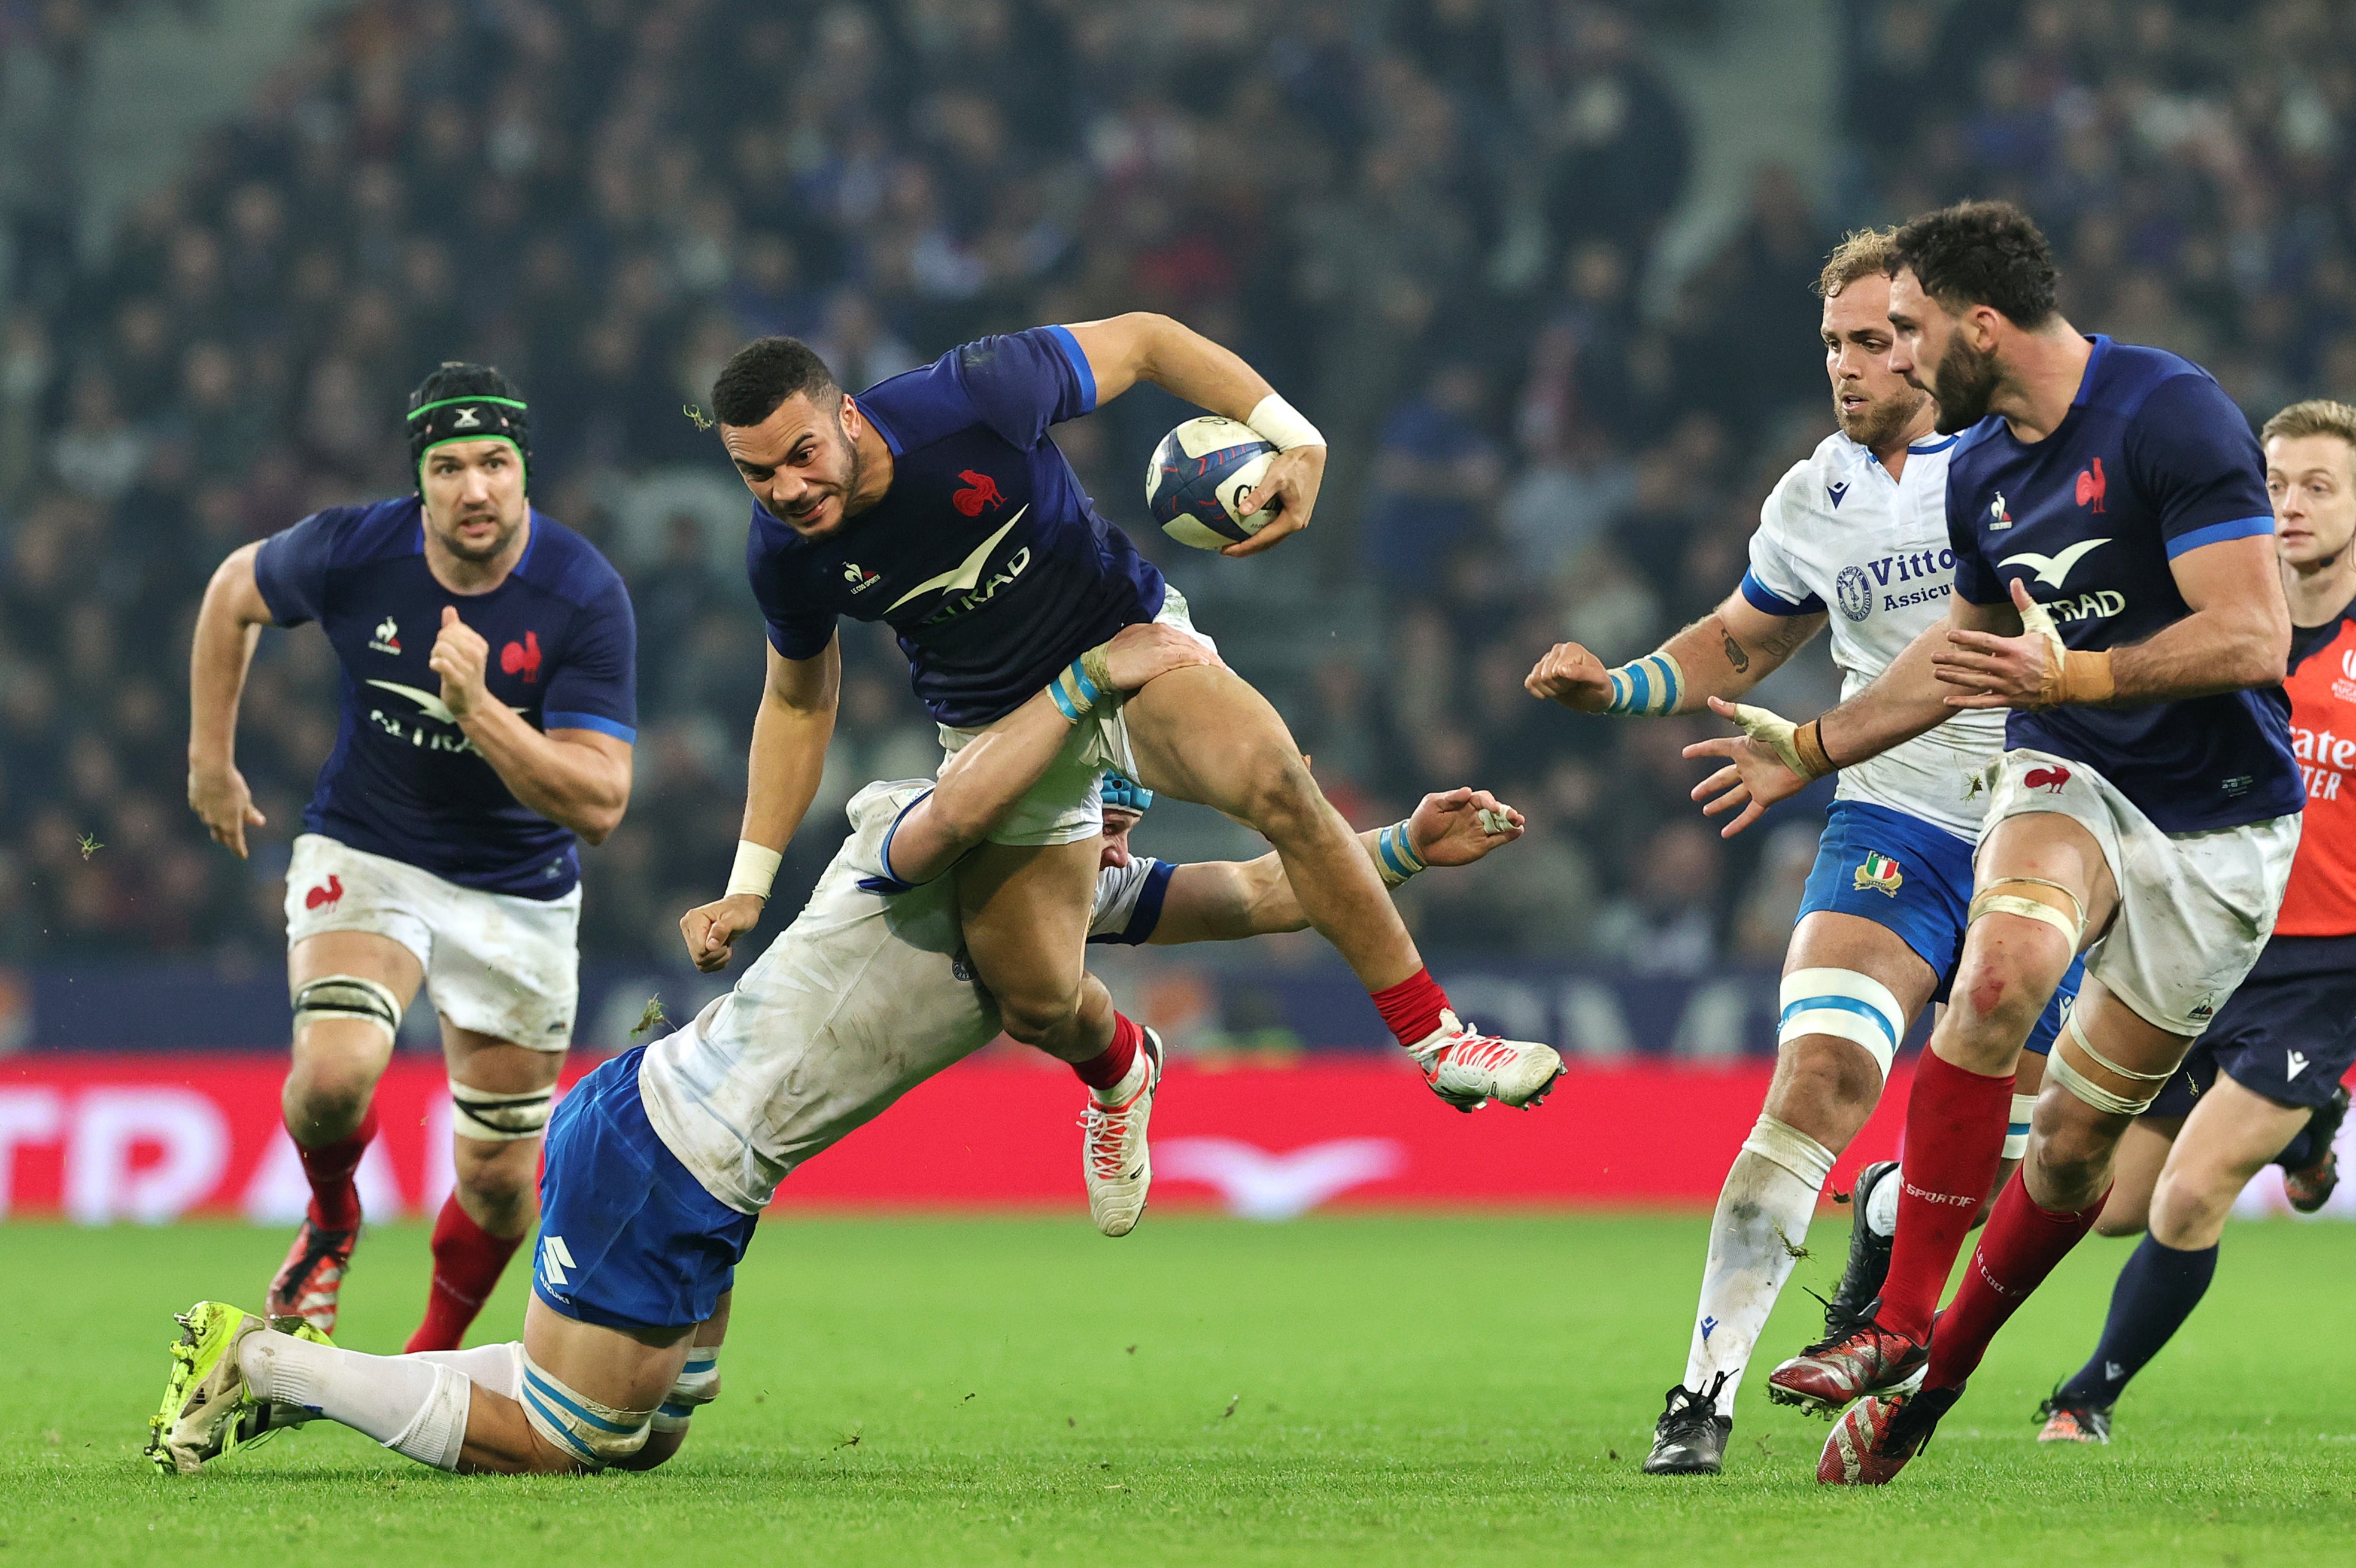 Italy have defended impressively against France this afternoon